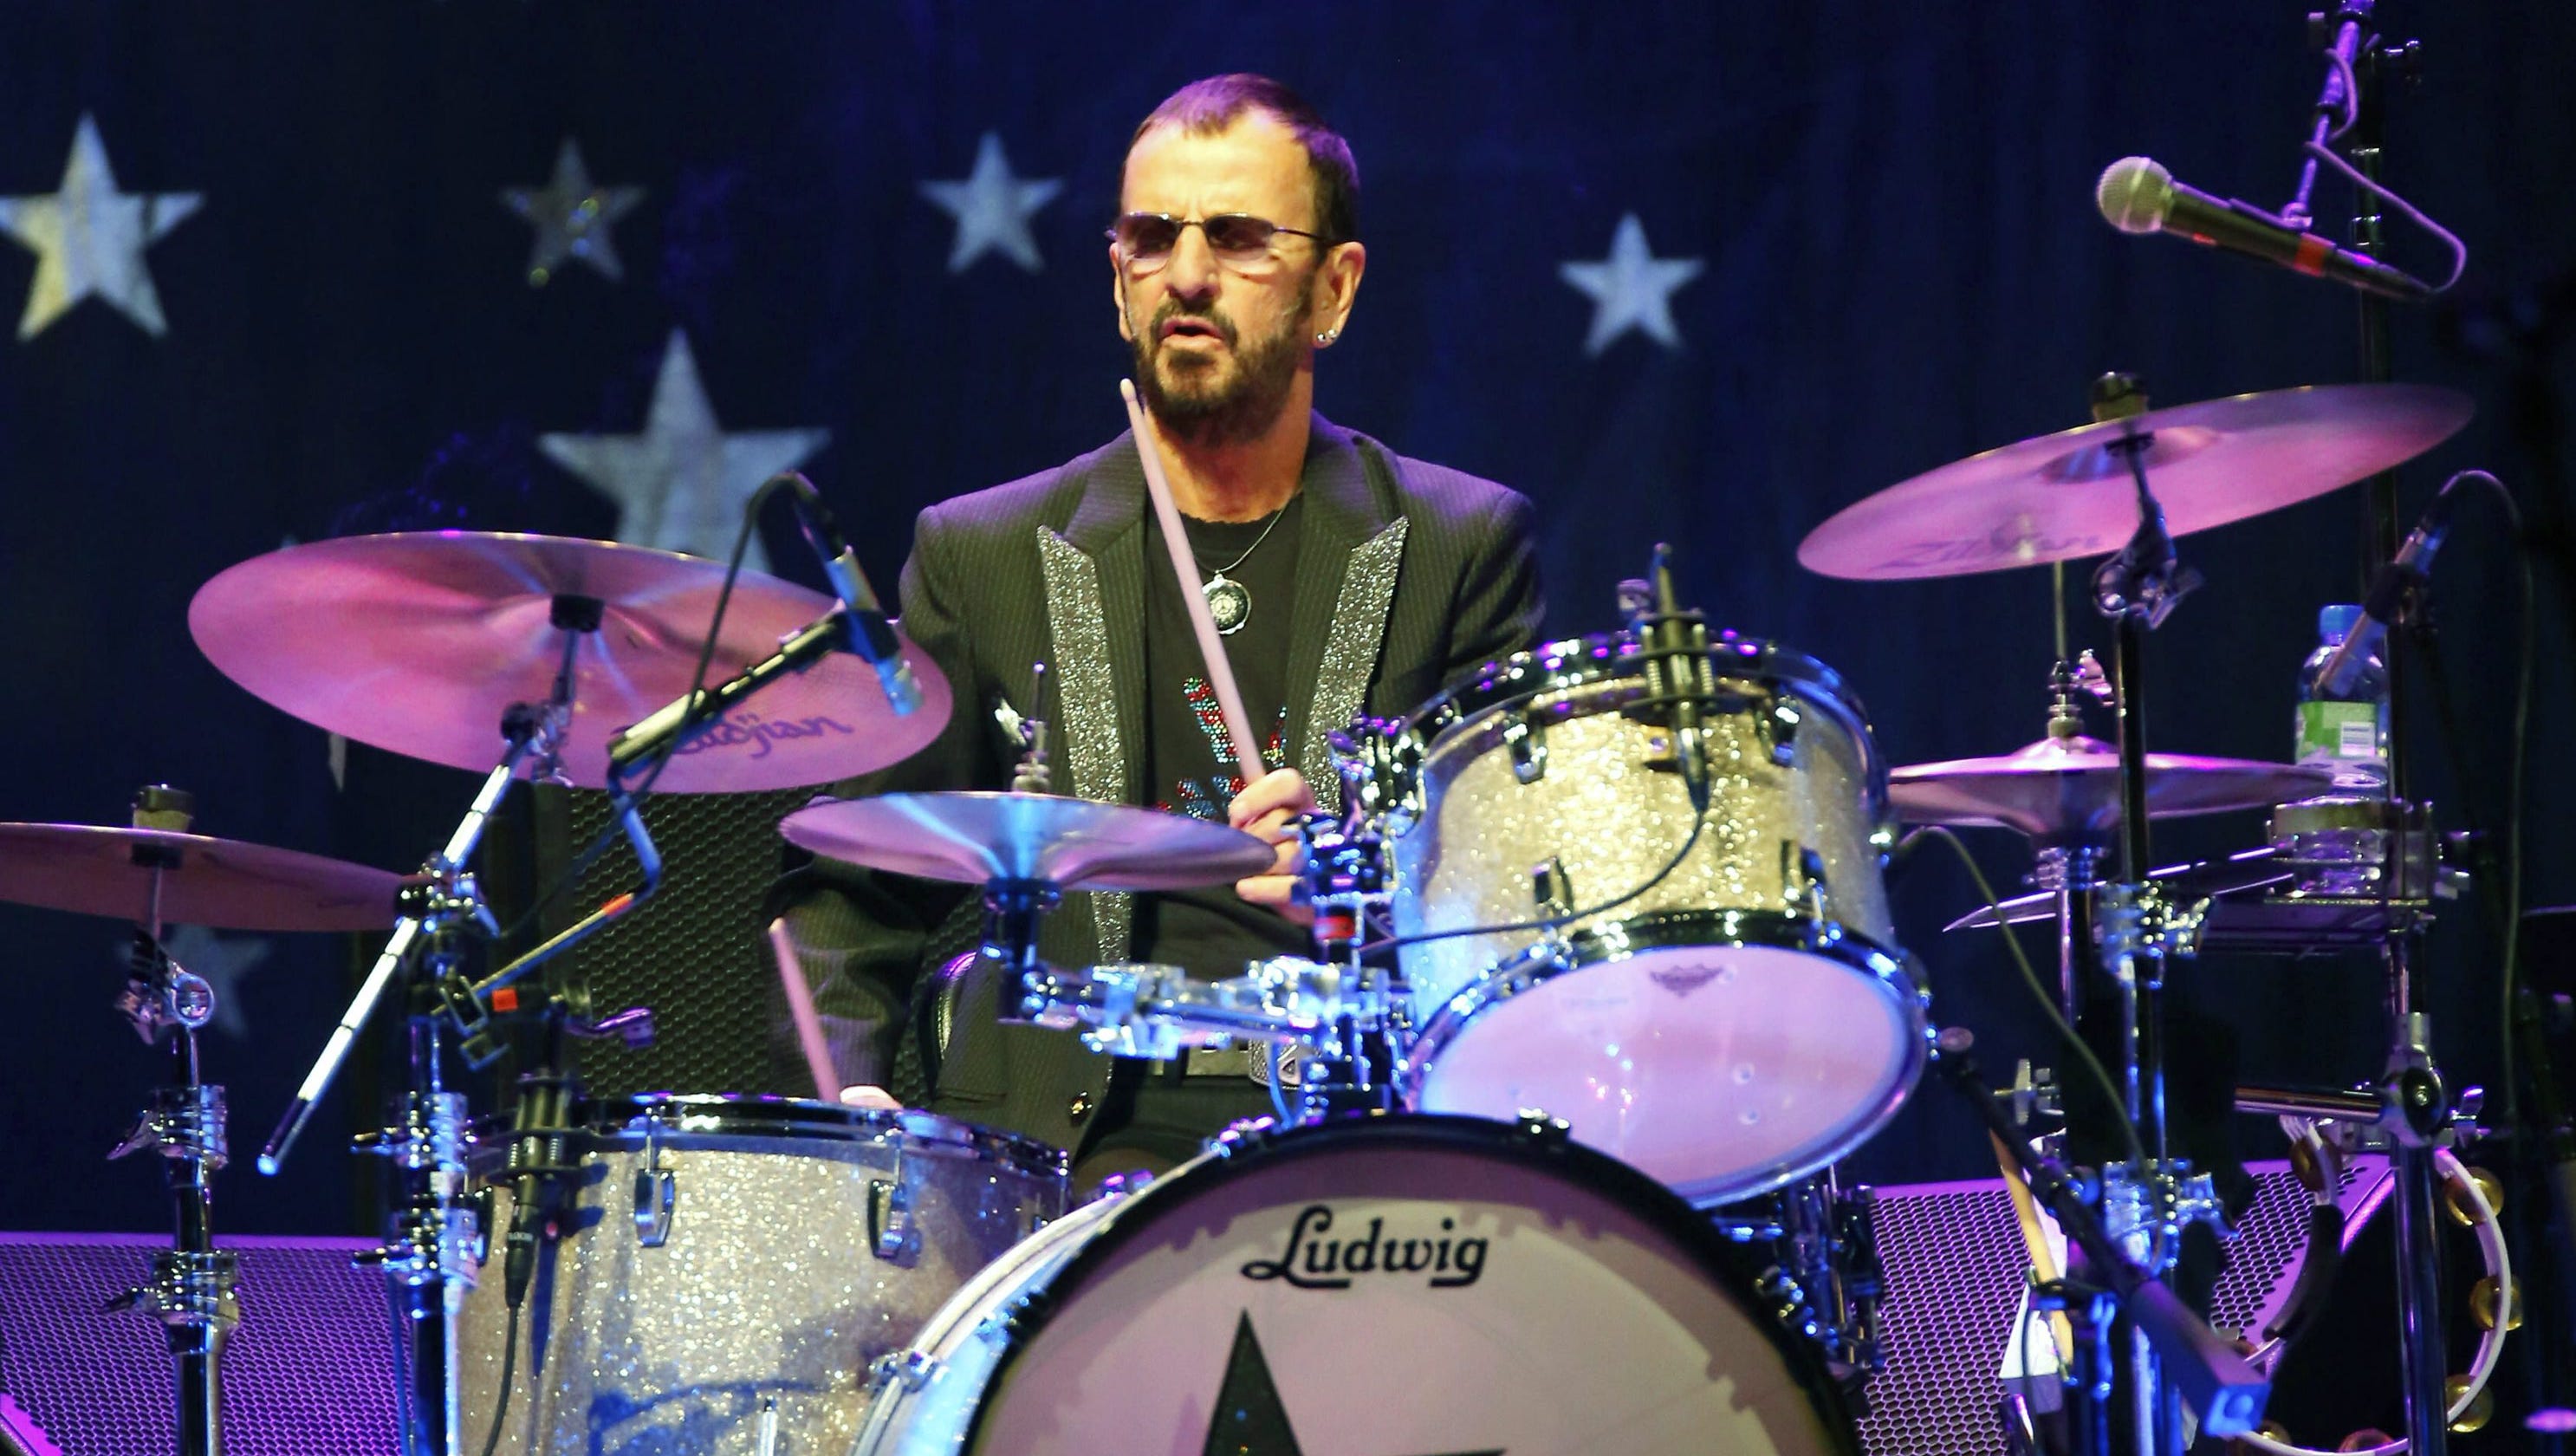 Ringo Starr will keep on drumming, but forget about a memoir: 'I'm not doing a book'